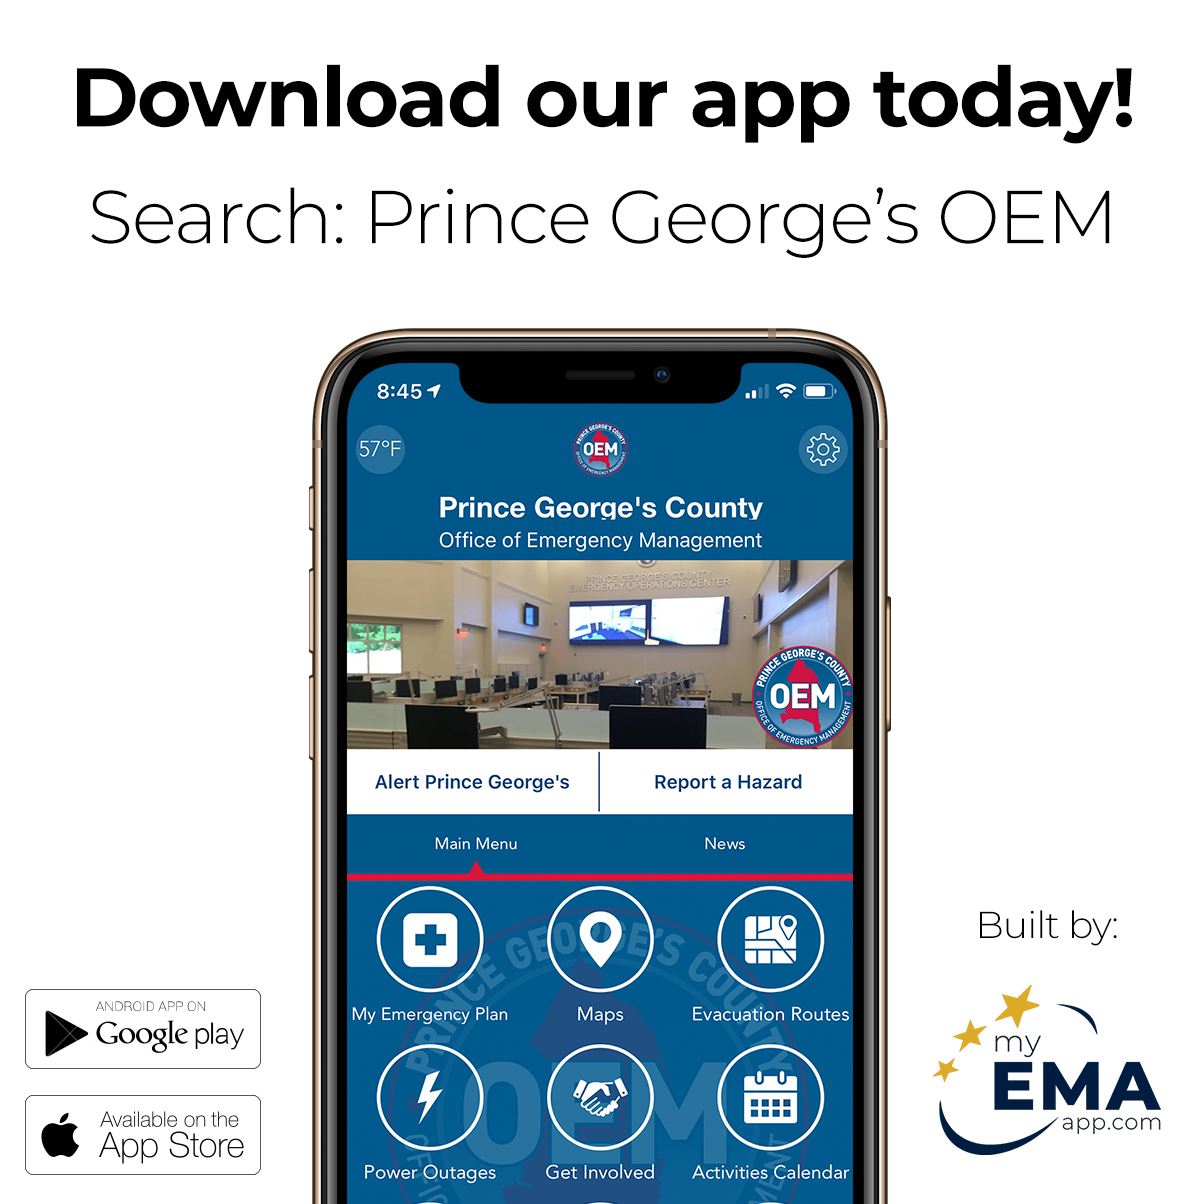 Download our App Today! Search: Prince George's OEM